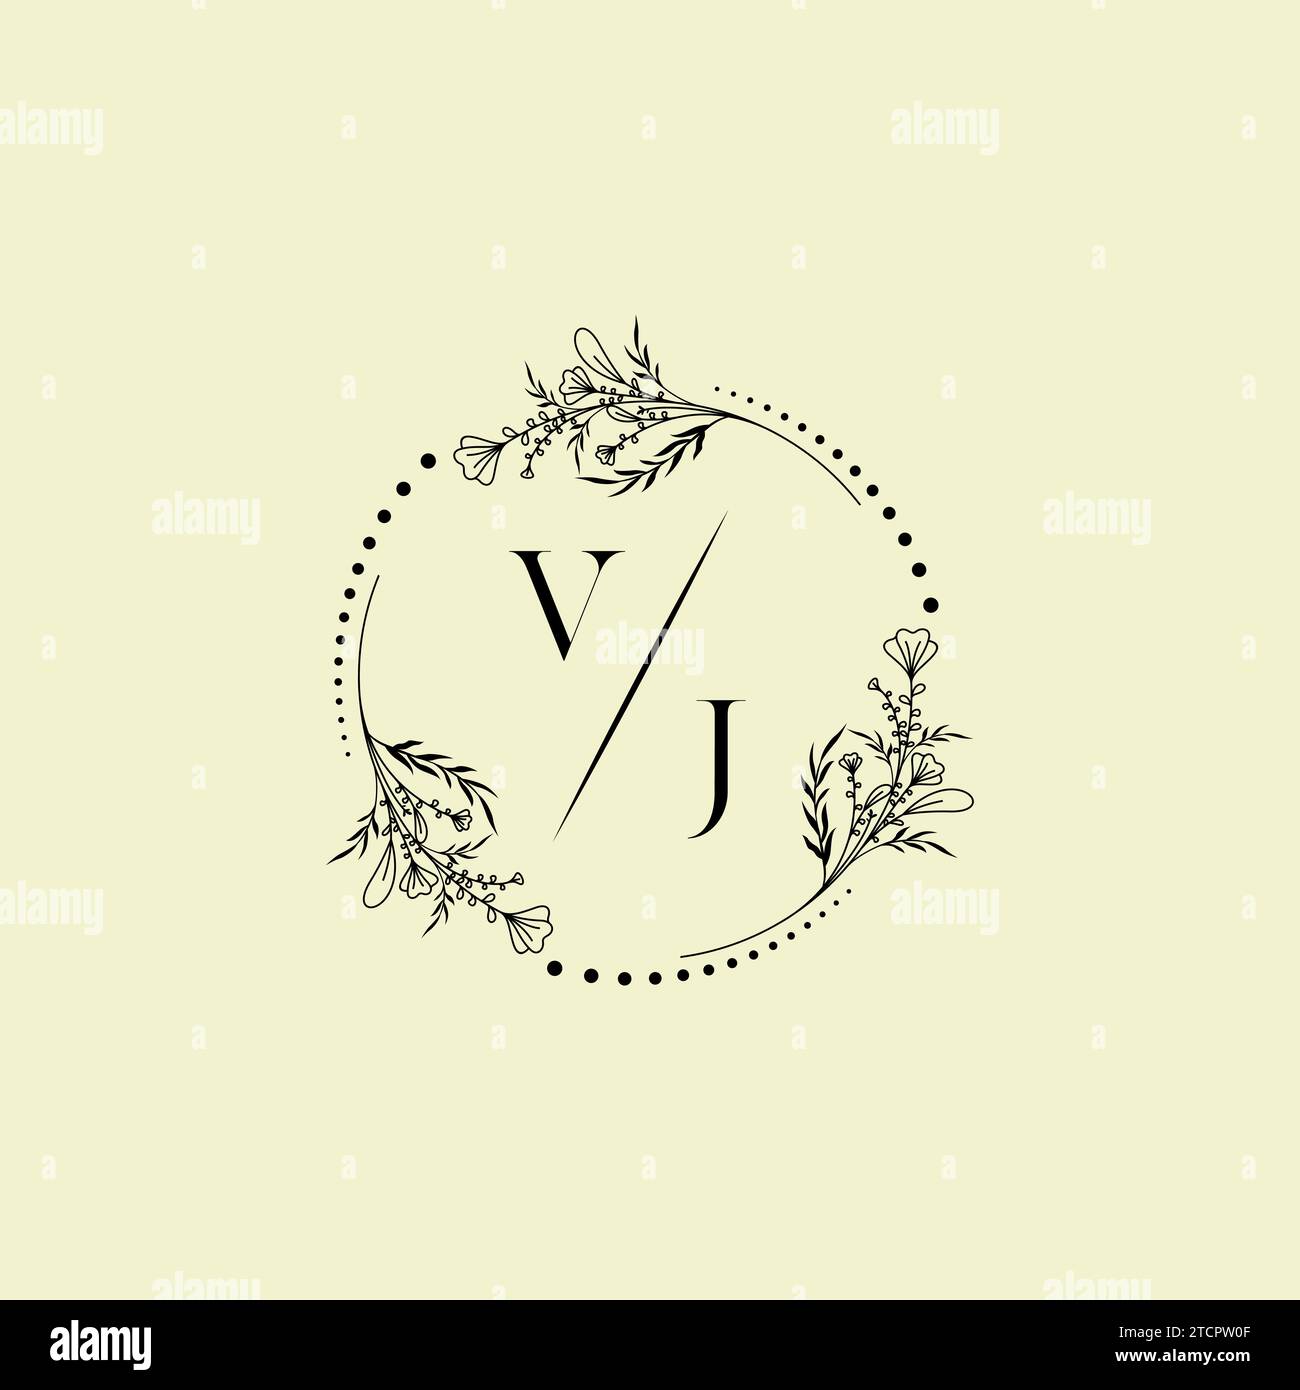 VJ wedding initial logo letters in high quality professional design that will print well across any print media Stock Vector